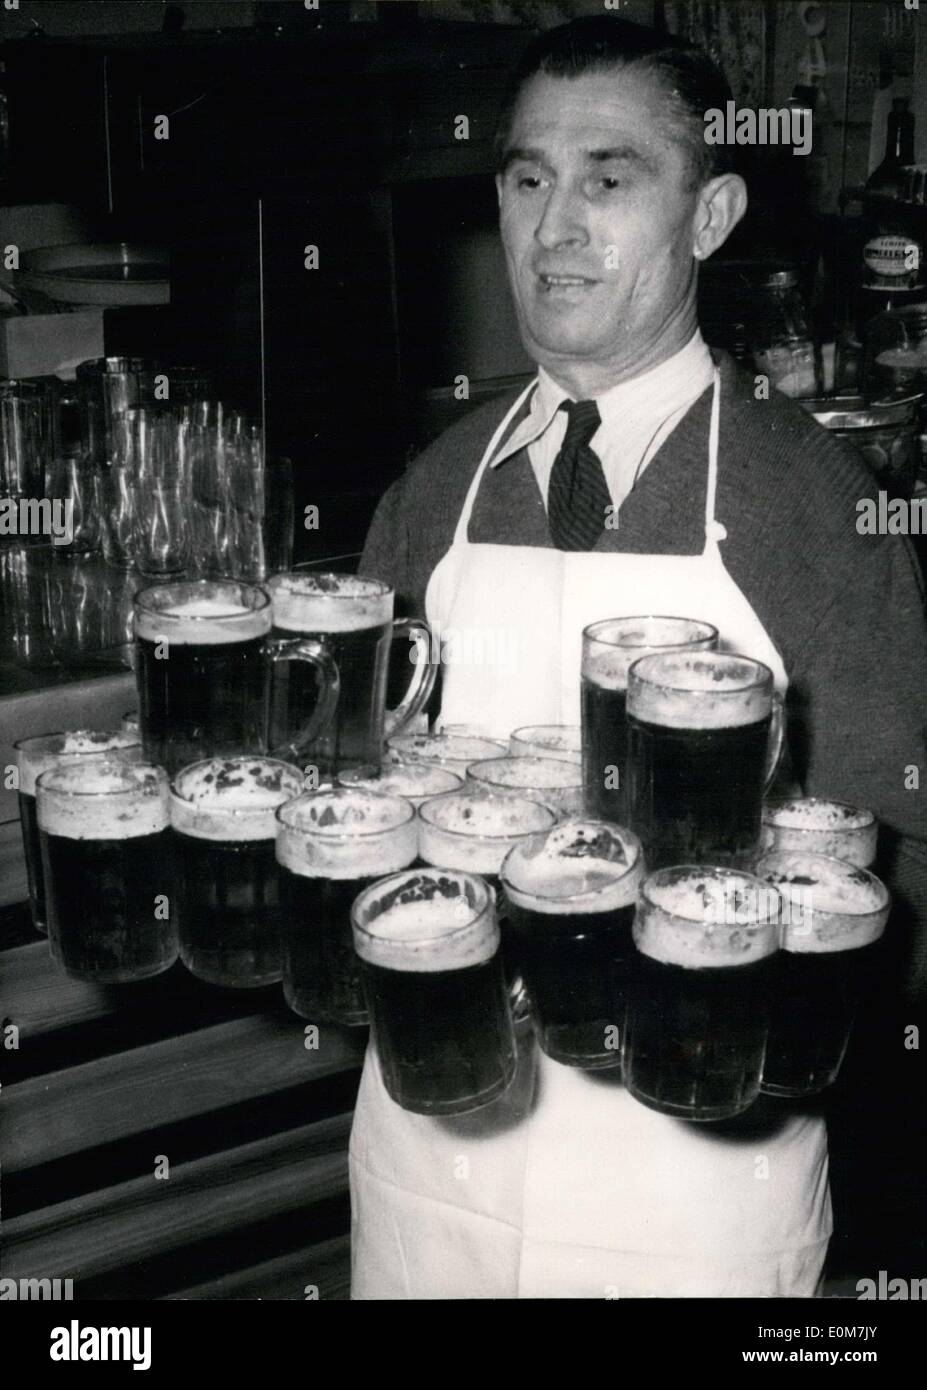 Nov. 19, 1953 - World Champion of Carrying Beers. This title belongs to Viennese man Karl Schulz(pictured here). When Karl Schulz heard the announcement from America that a New Yorker, Max Semmler, was the world champion for carrying 16 beers and became incensed. Karl Schulz can carry 22. Stock Photo